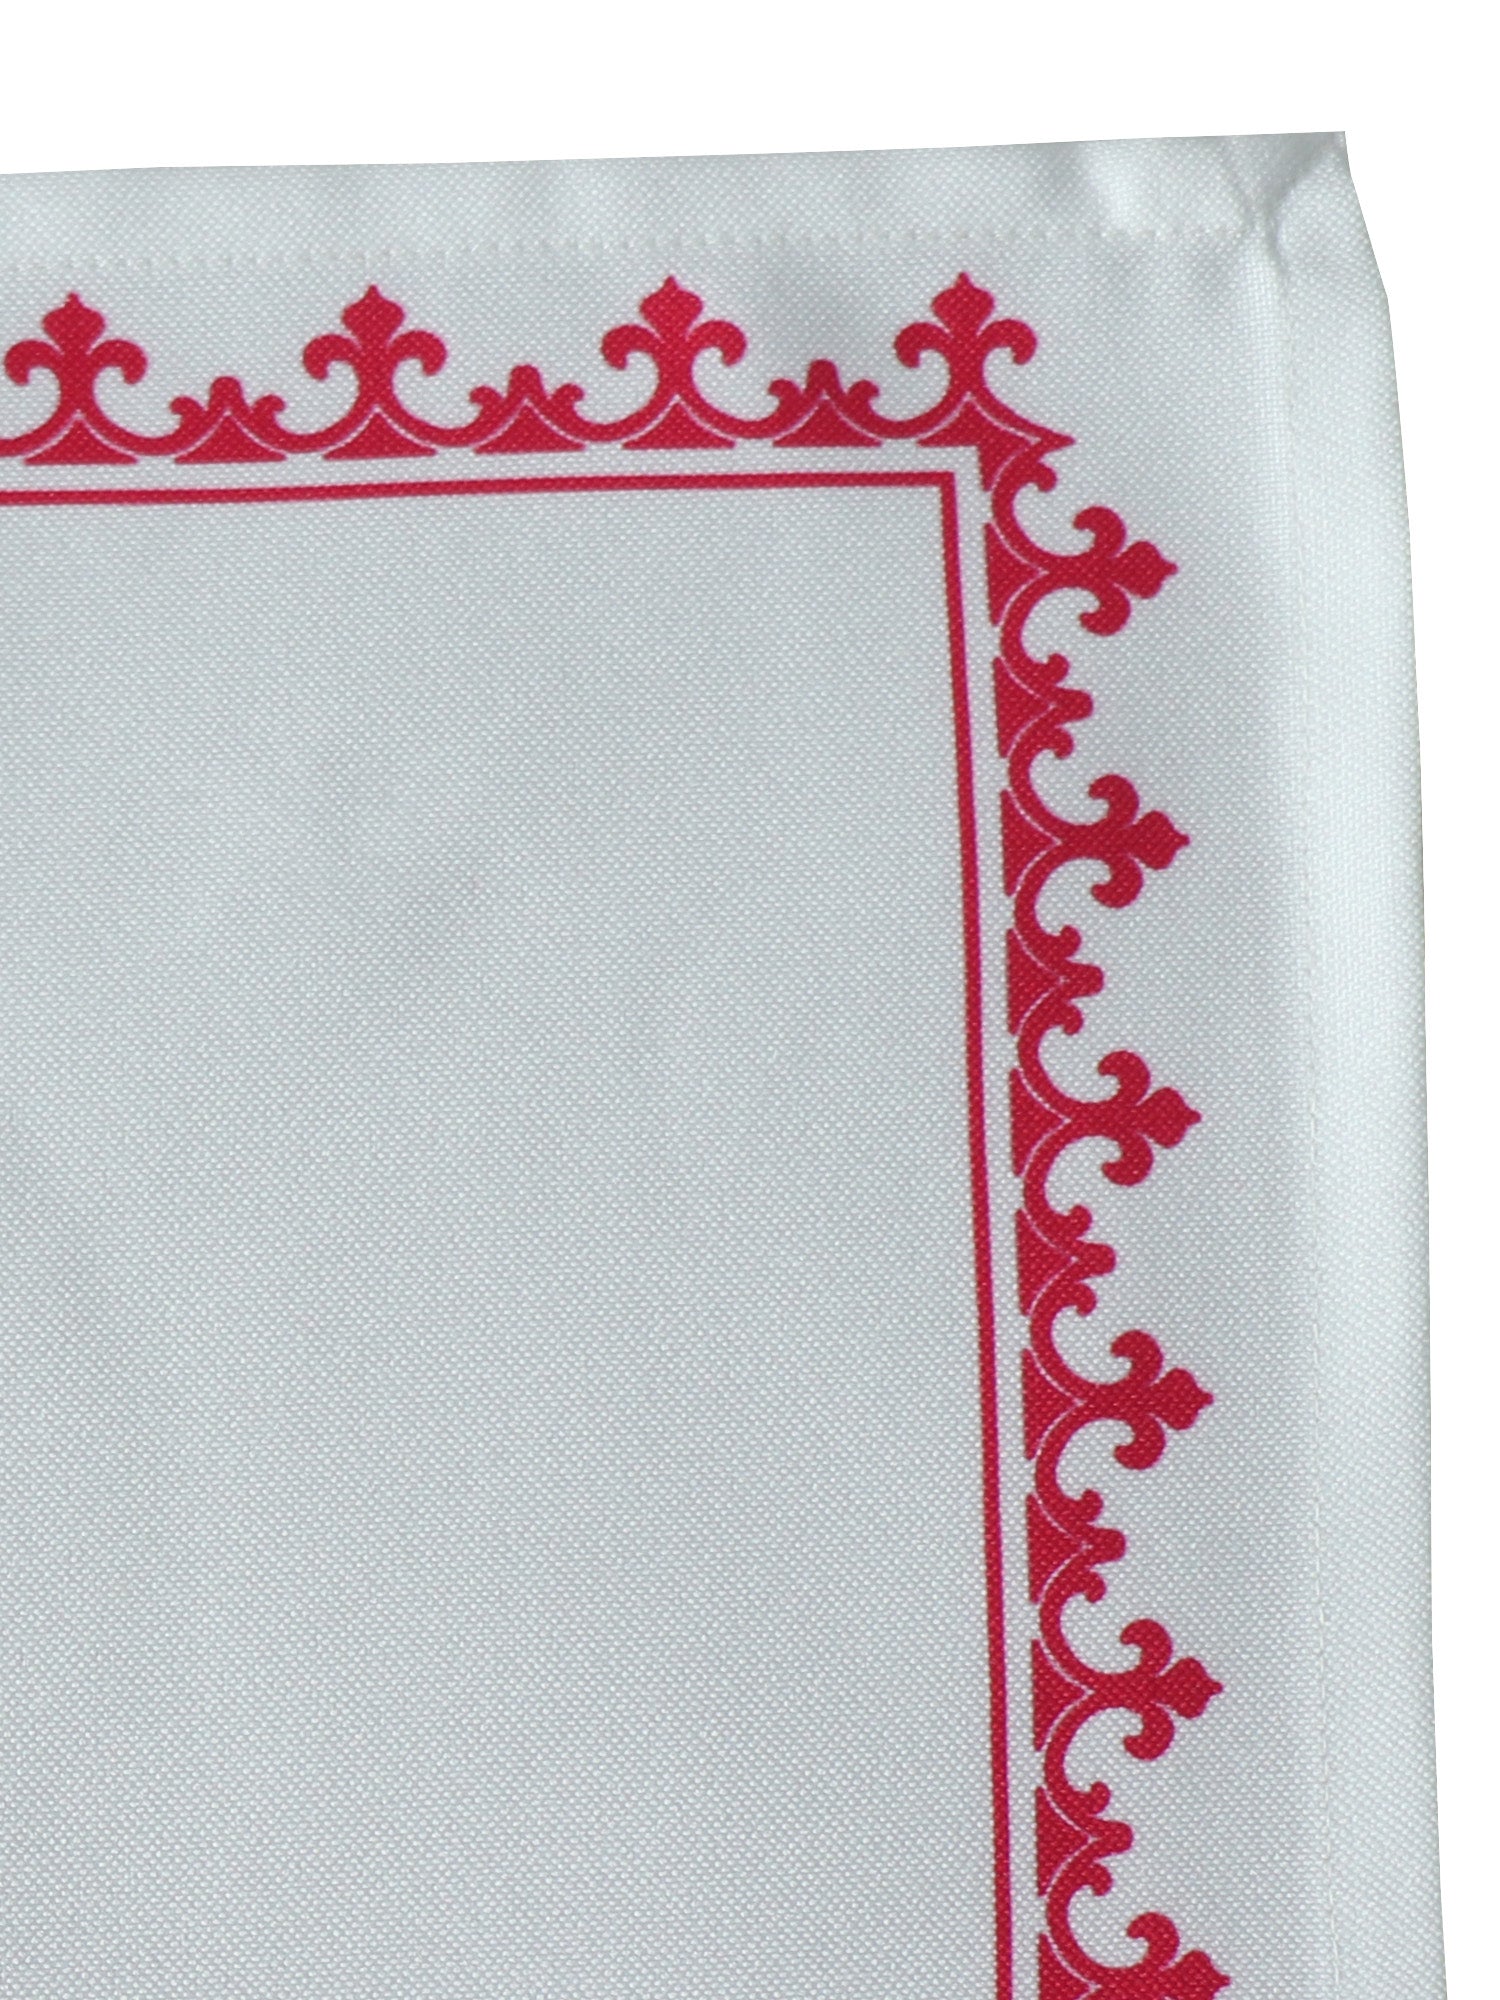 closeup of motif printed dinner tablemats in red and white contrast colors - 13x19 inch